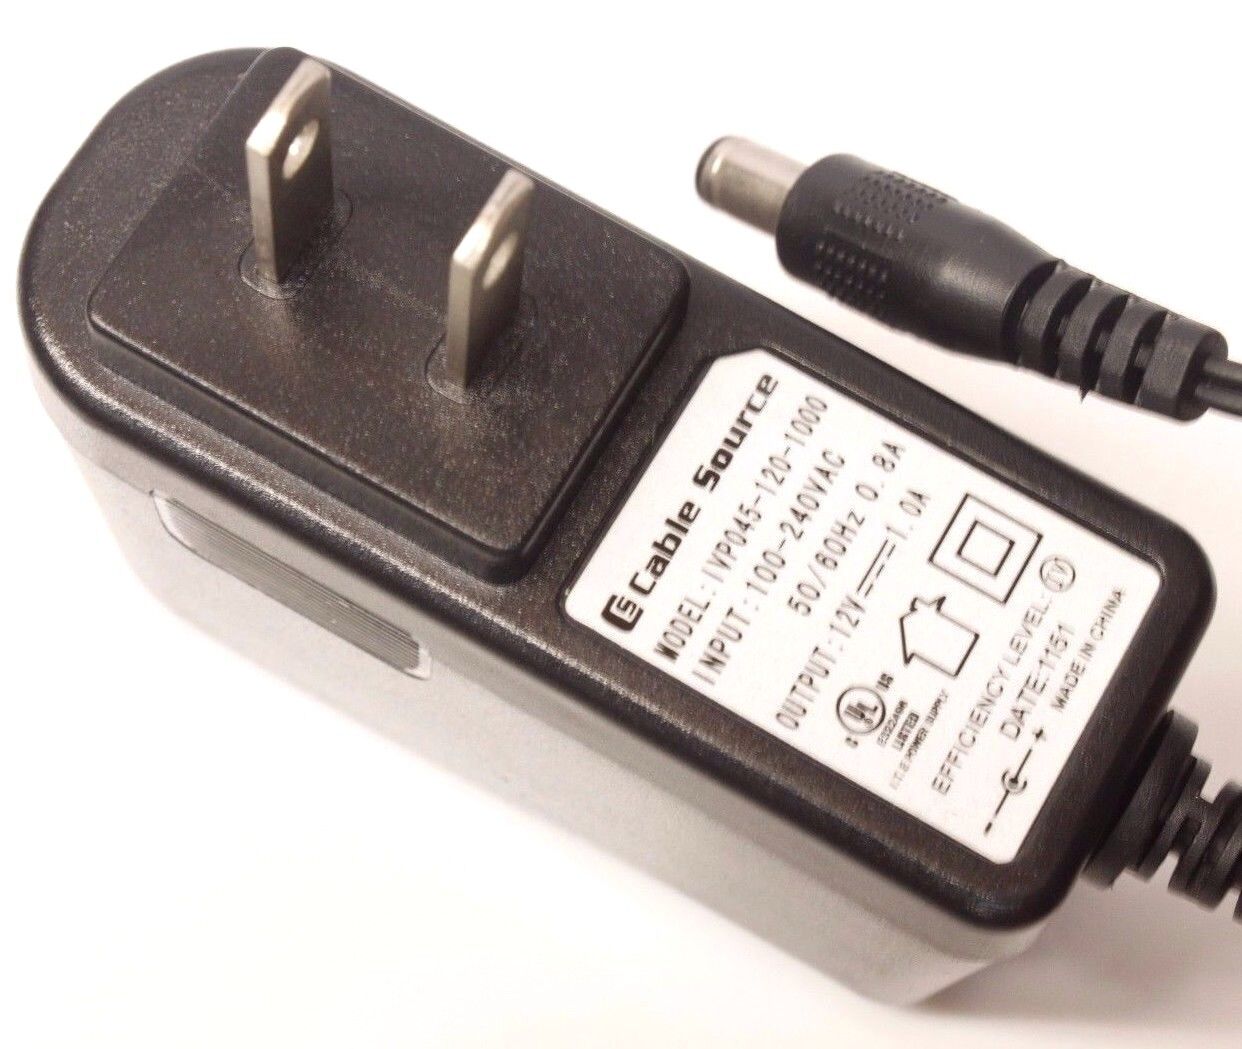 Cable Source IVP045-120-1000 AC DC Power Supply Adapter 12V 1A 1000mA Cord Brand: Cable Source Type: Adapter MPN: